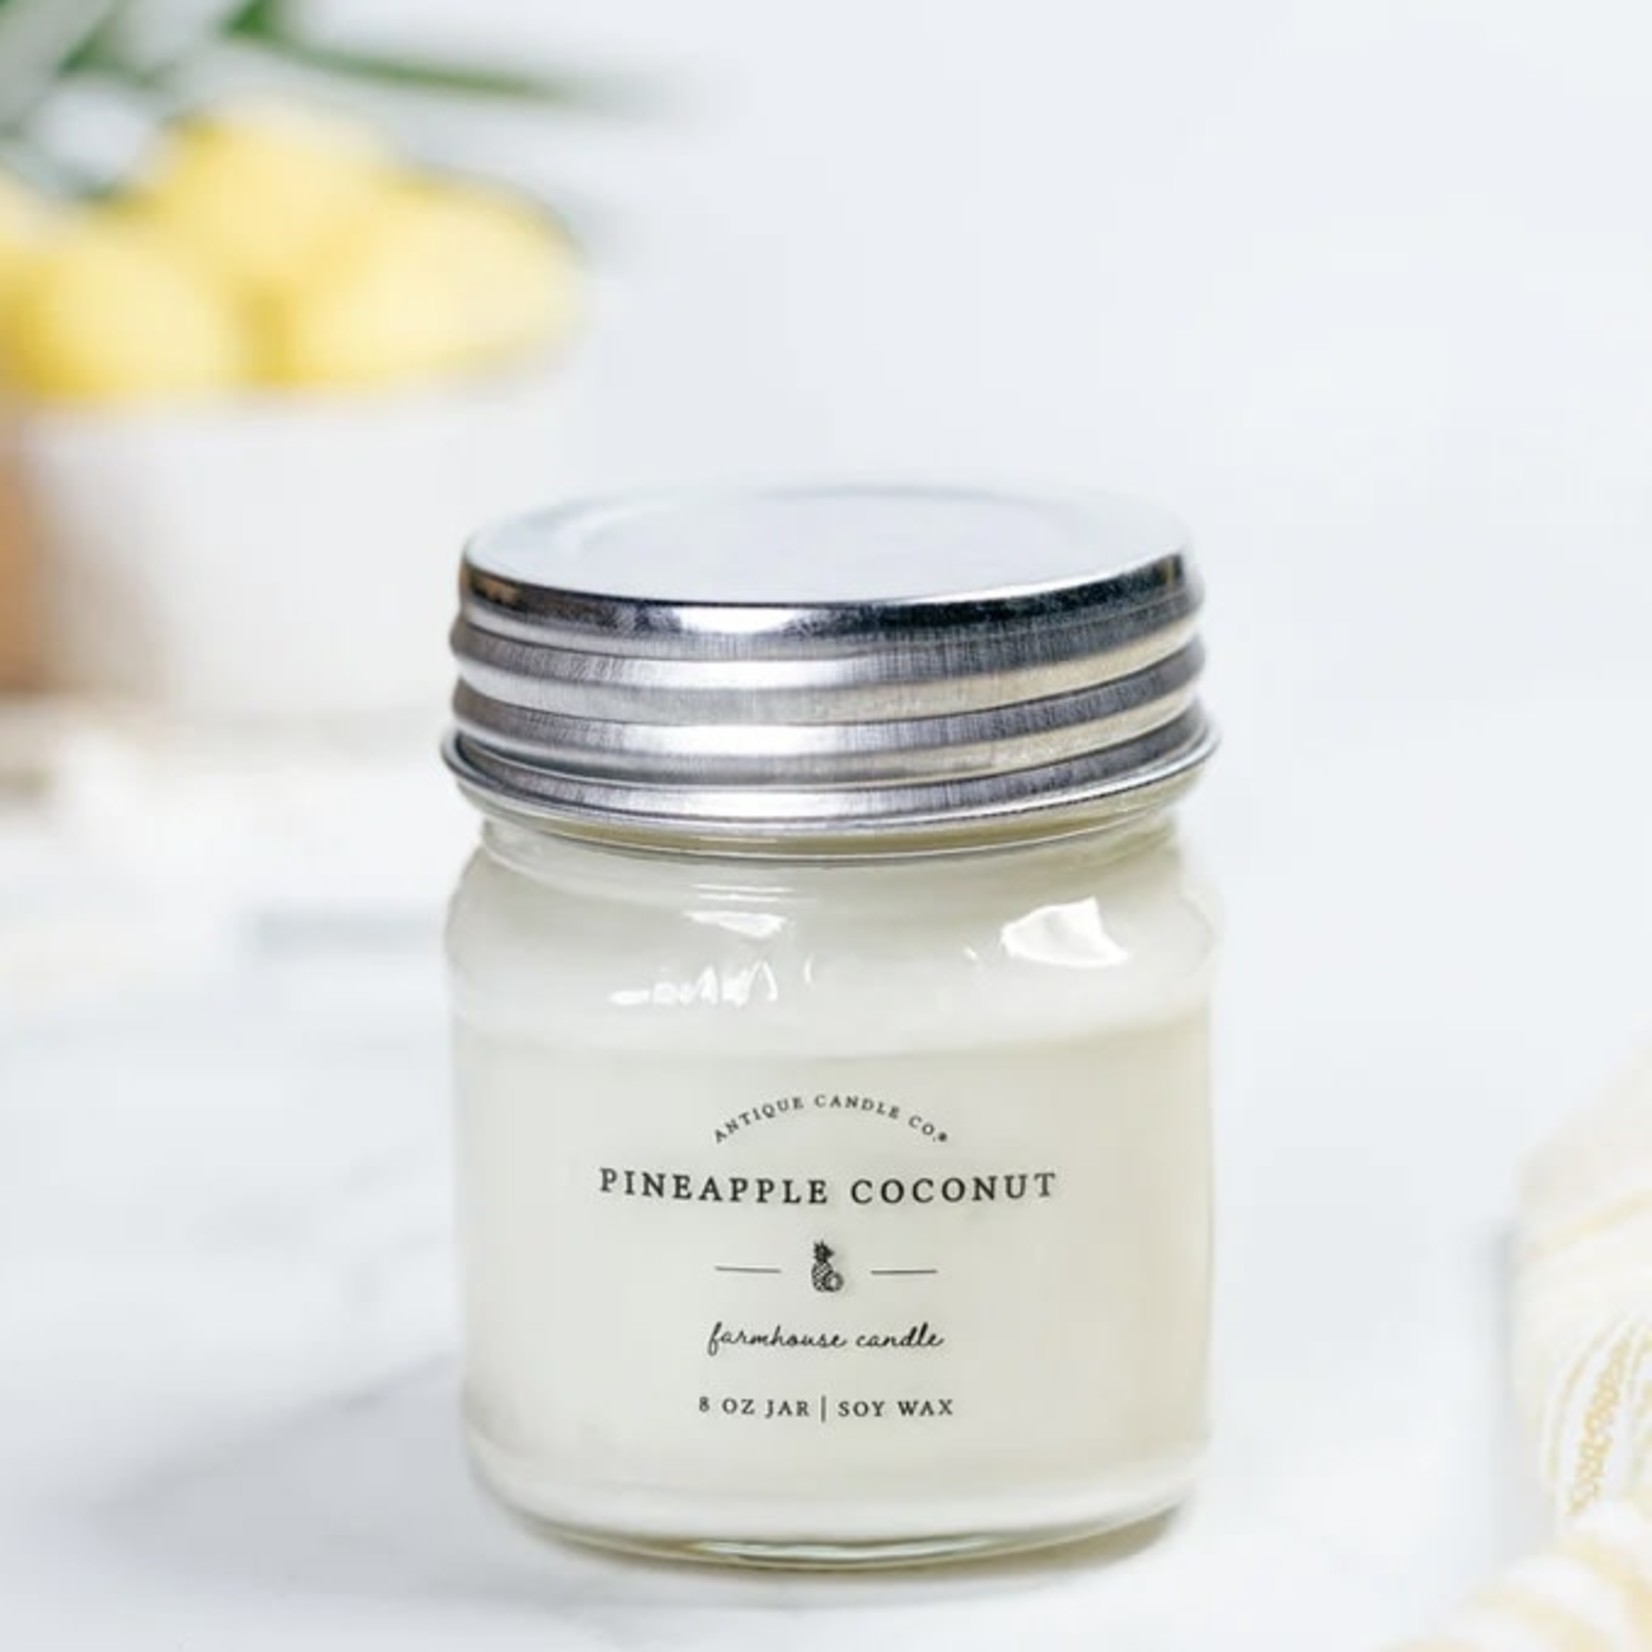 Antique Candle Co. Pineapple Coconut by Antique Candle Co.  /  8 oz